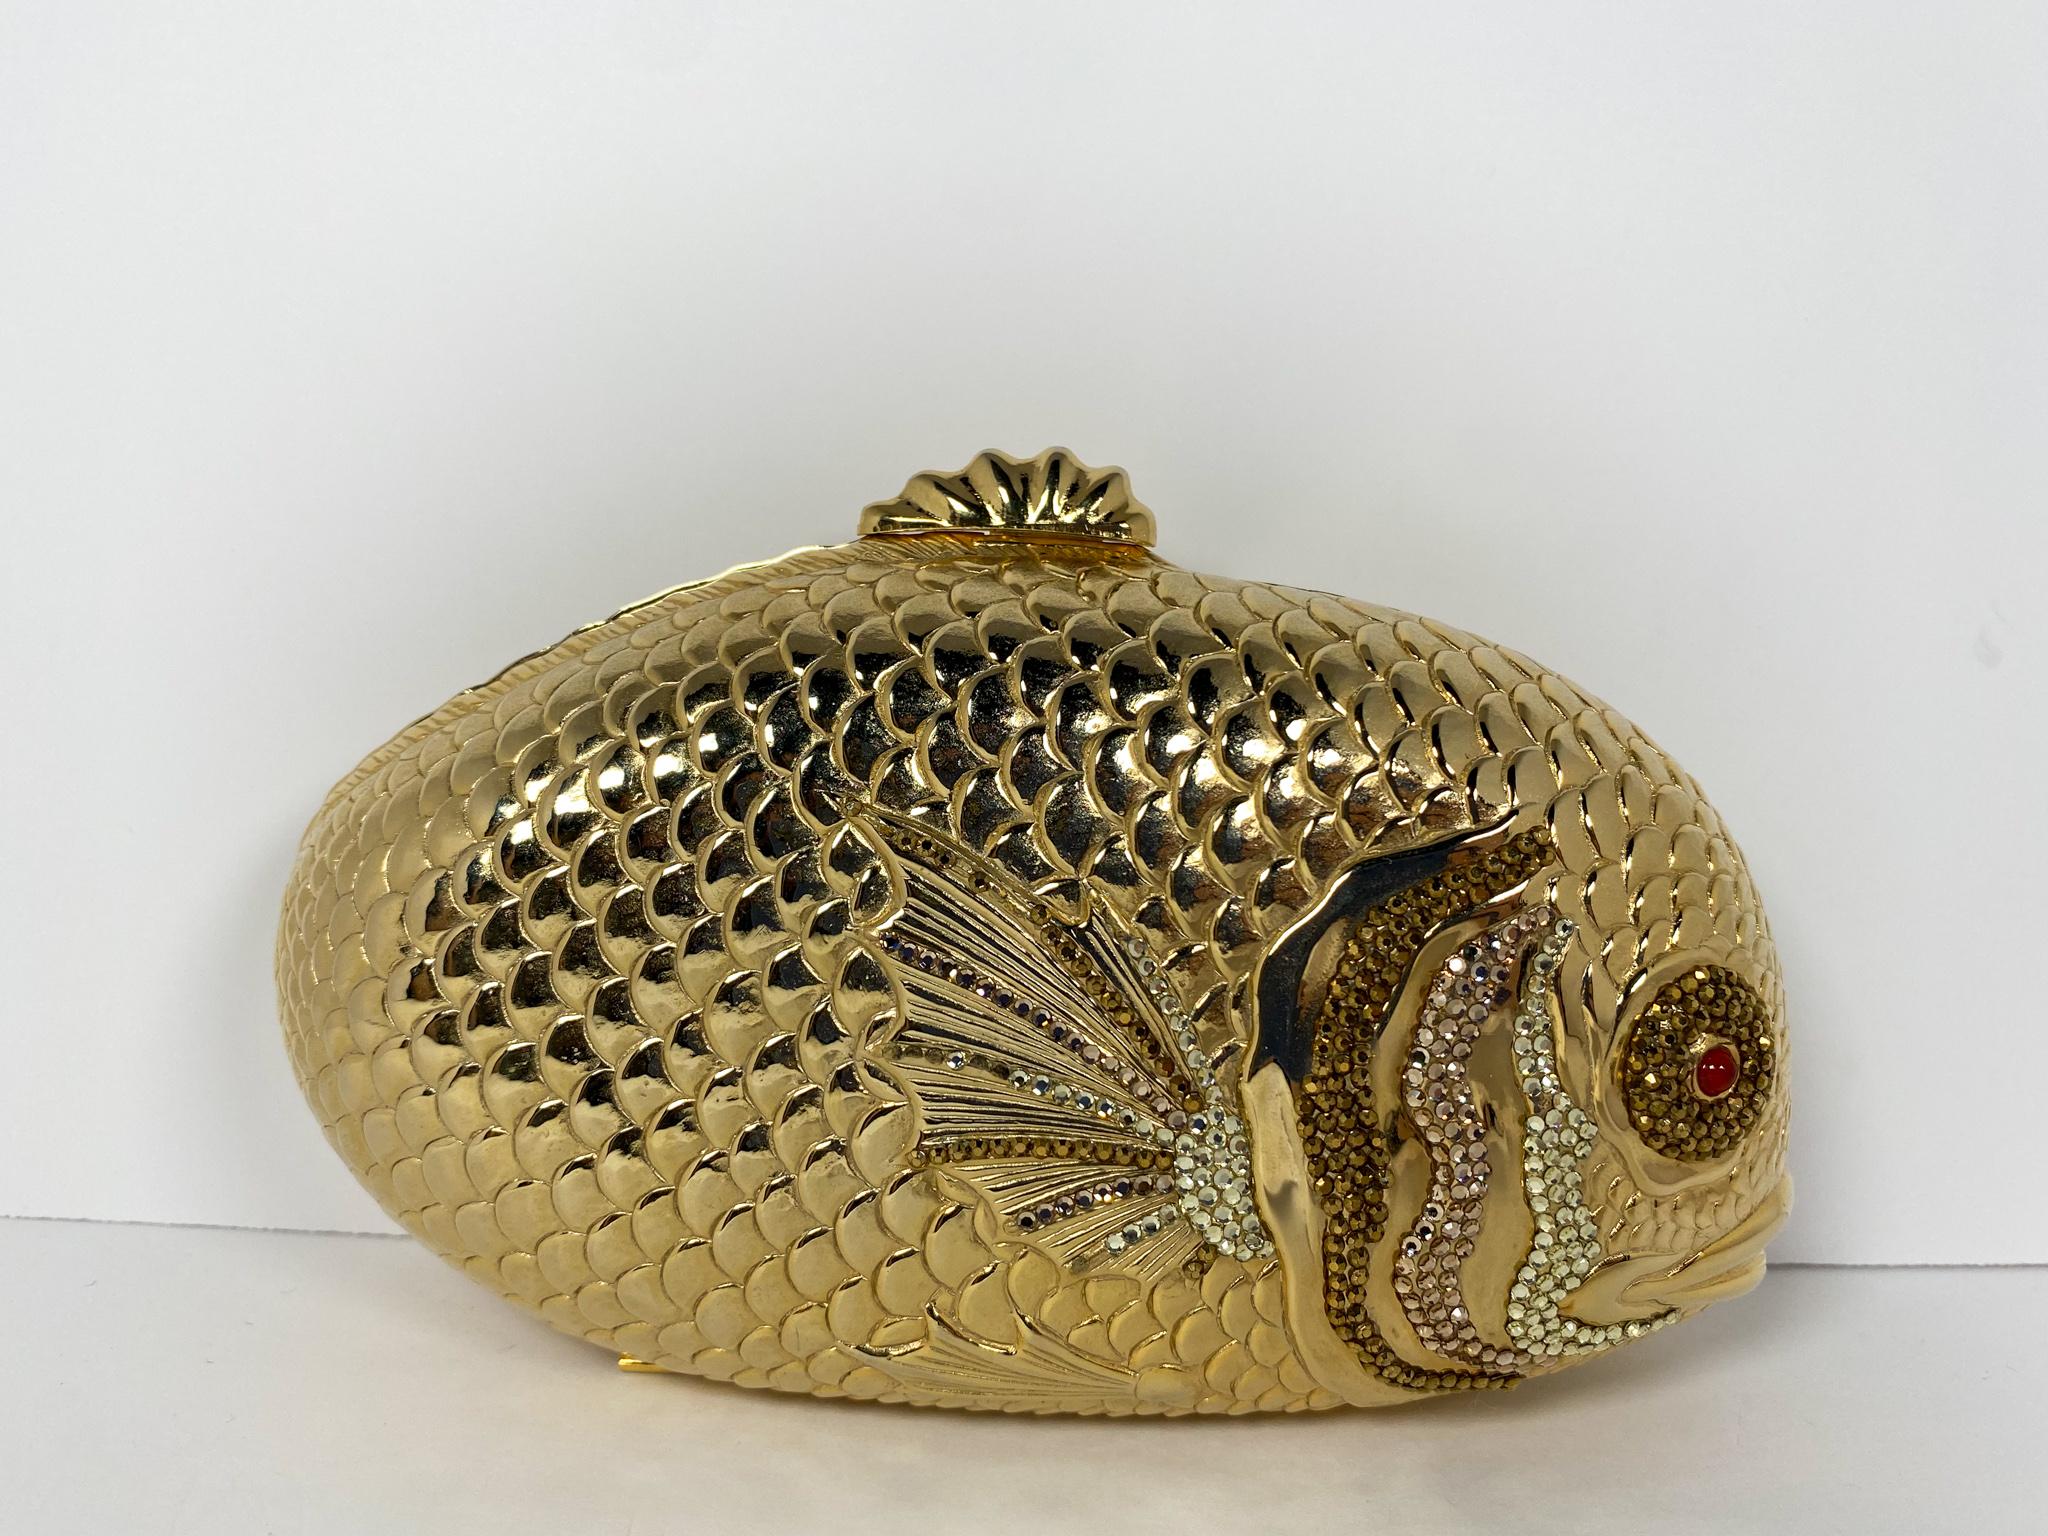 Gold-tone hardware in the shape of a fish with a push lock clasp, lightly covered in brown, gold, and silver toned Swarovski crystals.
		
Condition: Good used condition.
Exterior: Some loose and missing crystals.
Interior: Lined with leather, split